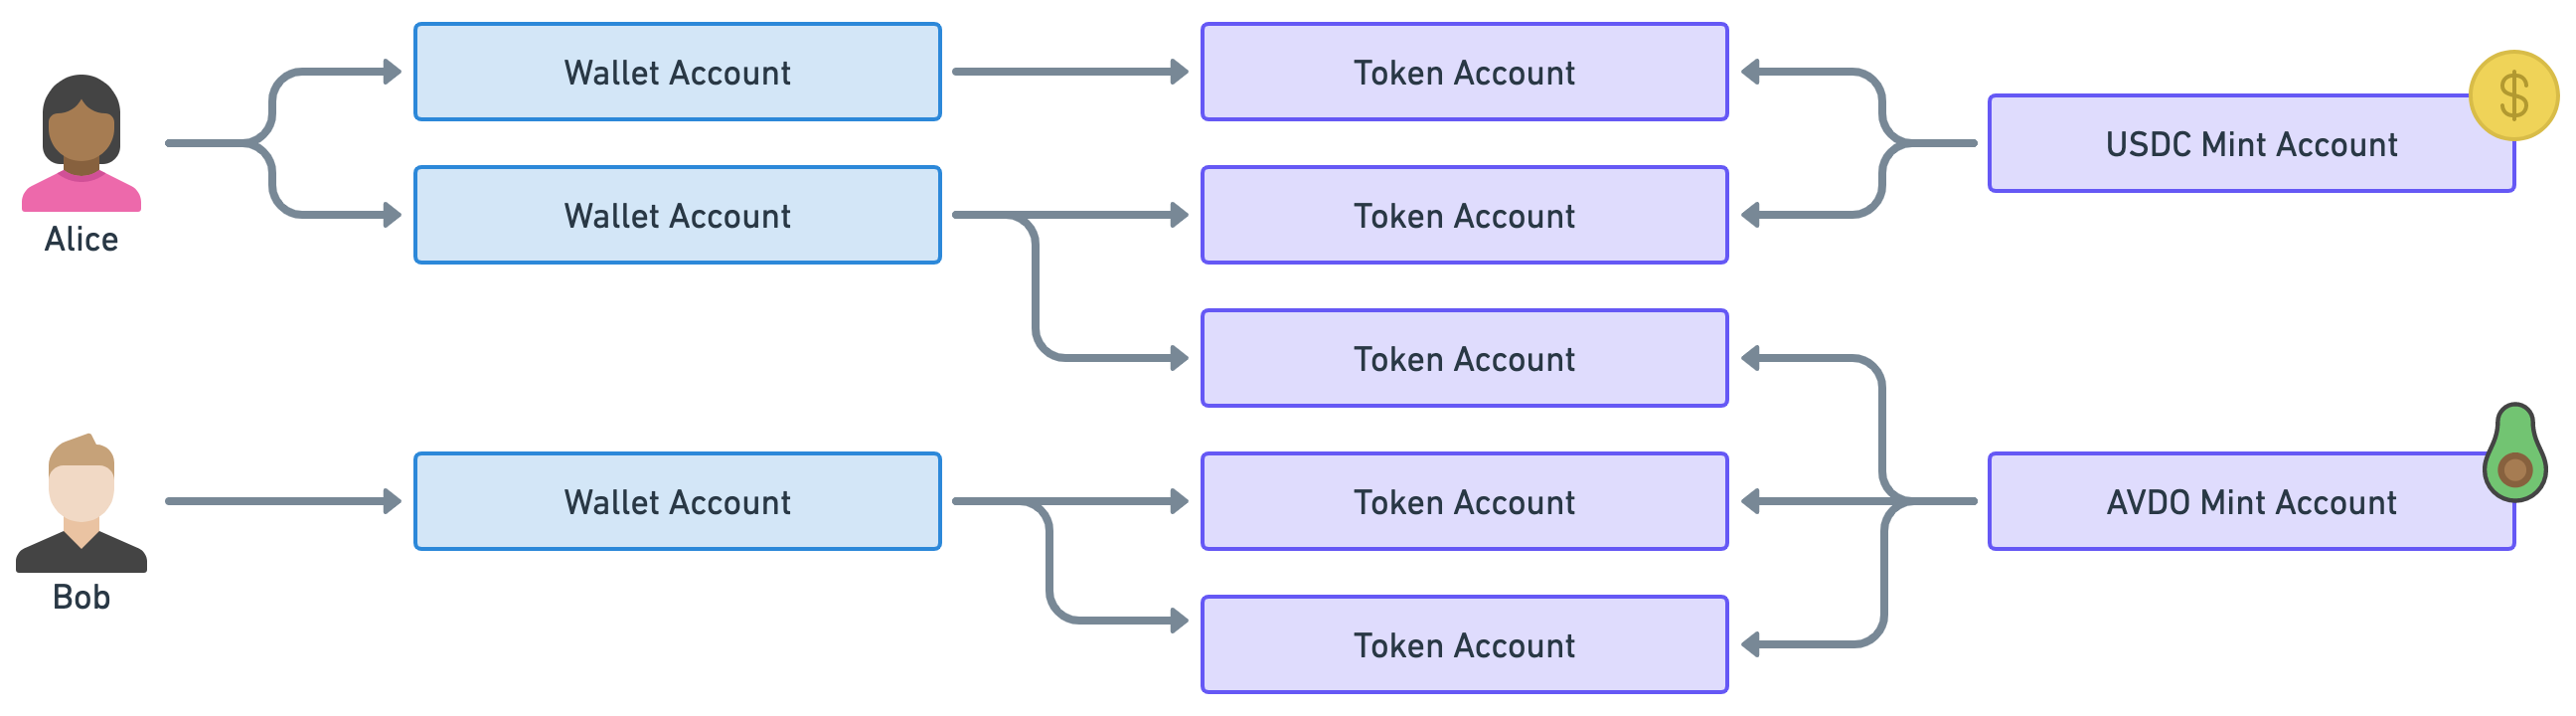 Example diagram showing Alice owning two wallet accounts. The first one is linked to the “USDC Mint Account” via one token account. The second one is linked to the USDC and AVDO Mint Accounts via one token account each. Bob owns only one wallet account that is linked to AVDO via two token accounts.